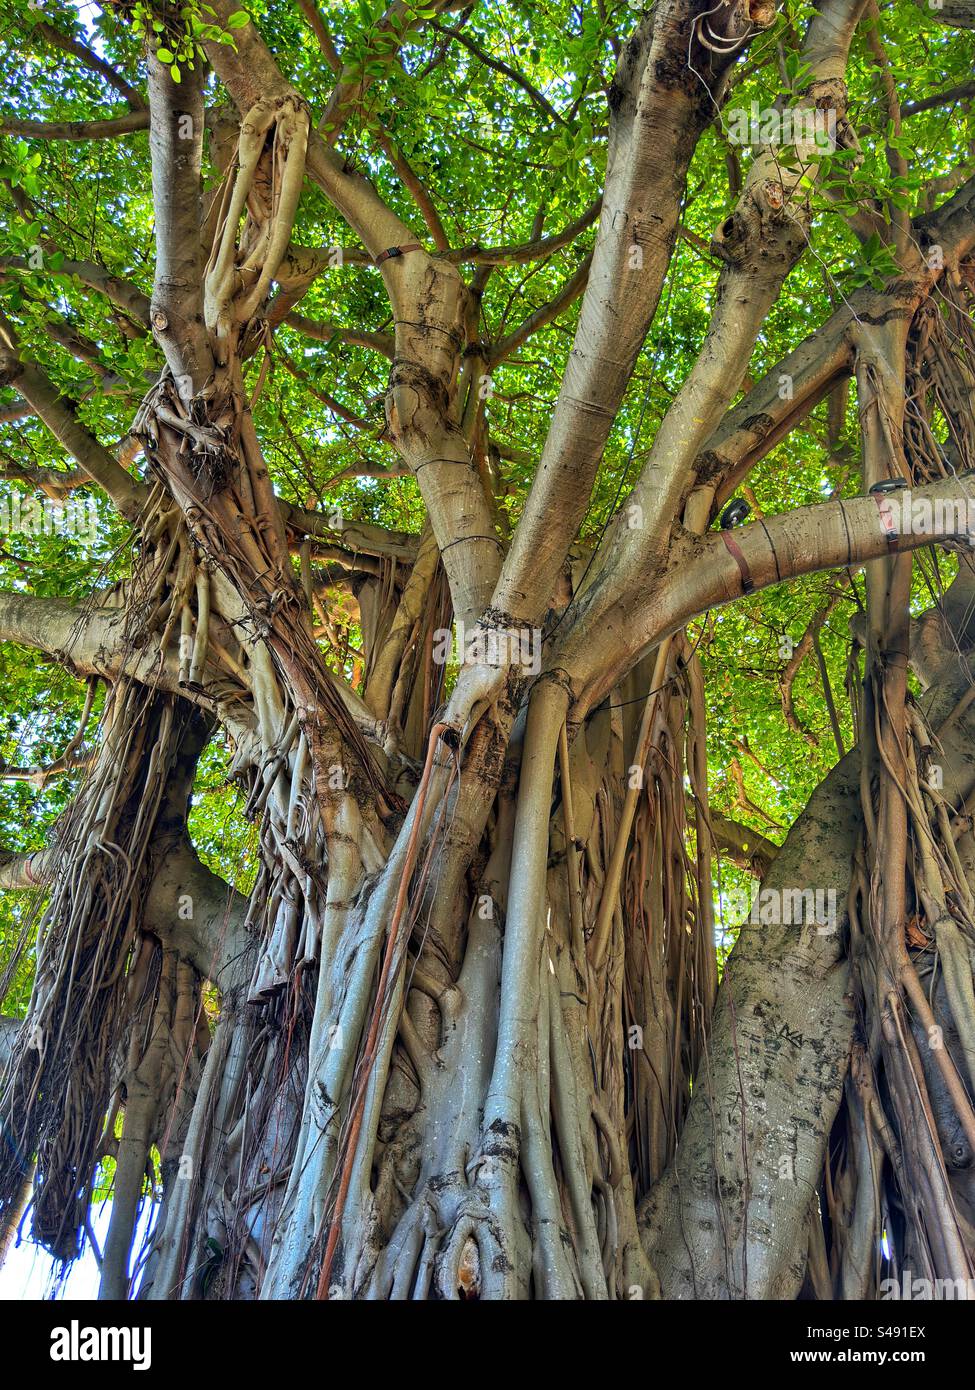 Close up view of a mature Banyan fig tree Stock Photo